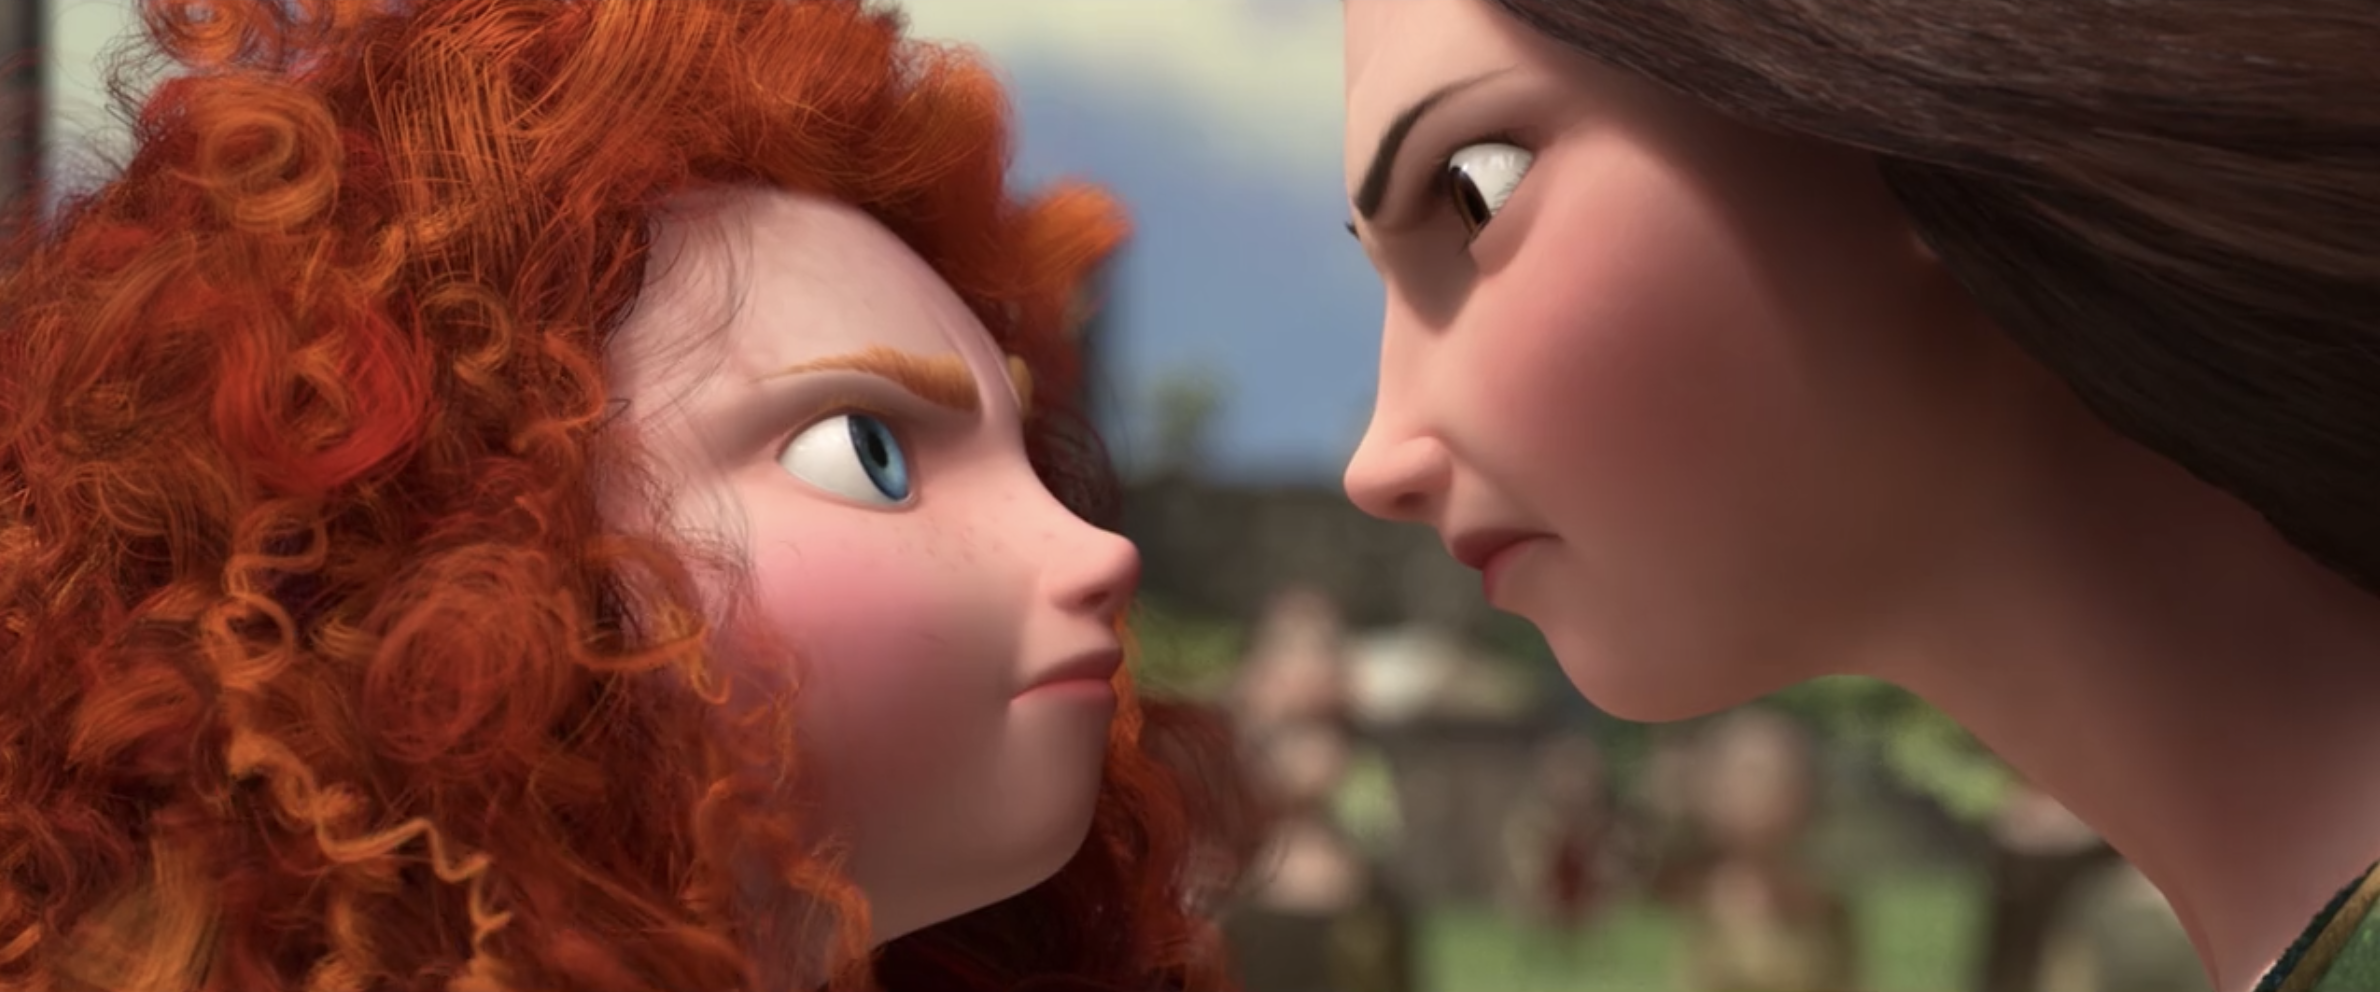 Merida and Queen Elinor staring intensely into each other&#x27;s eyes